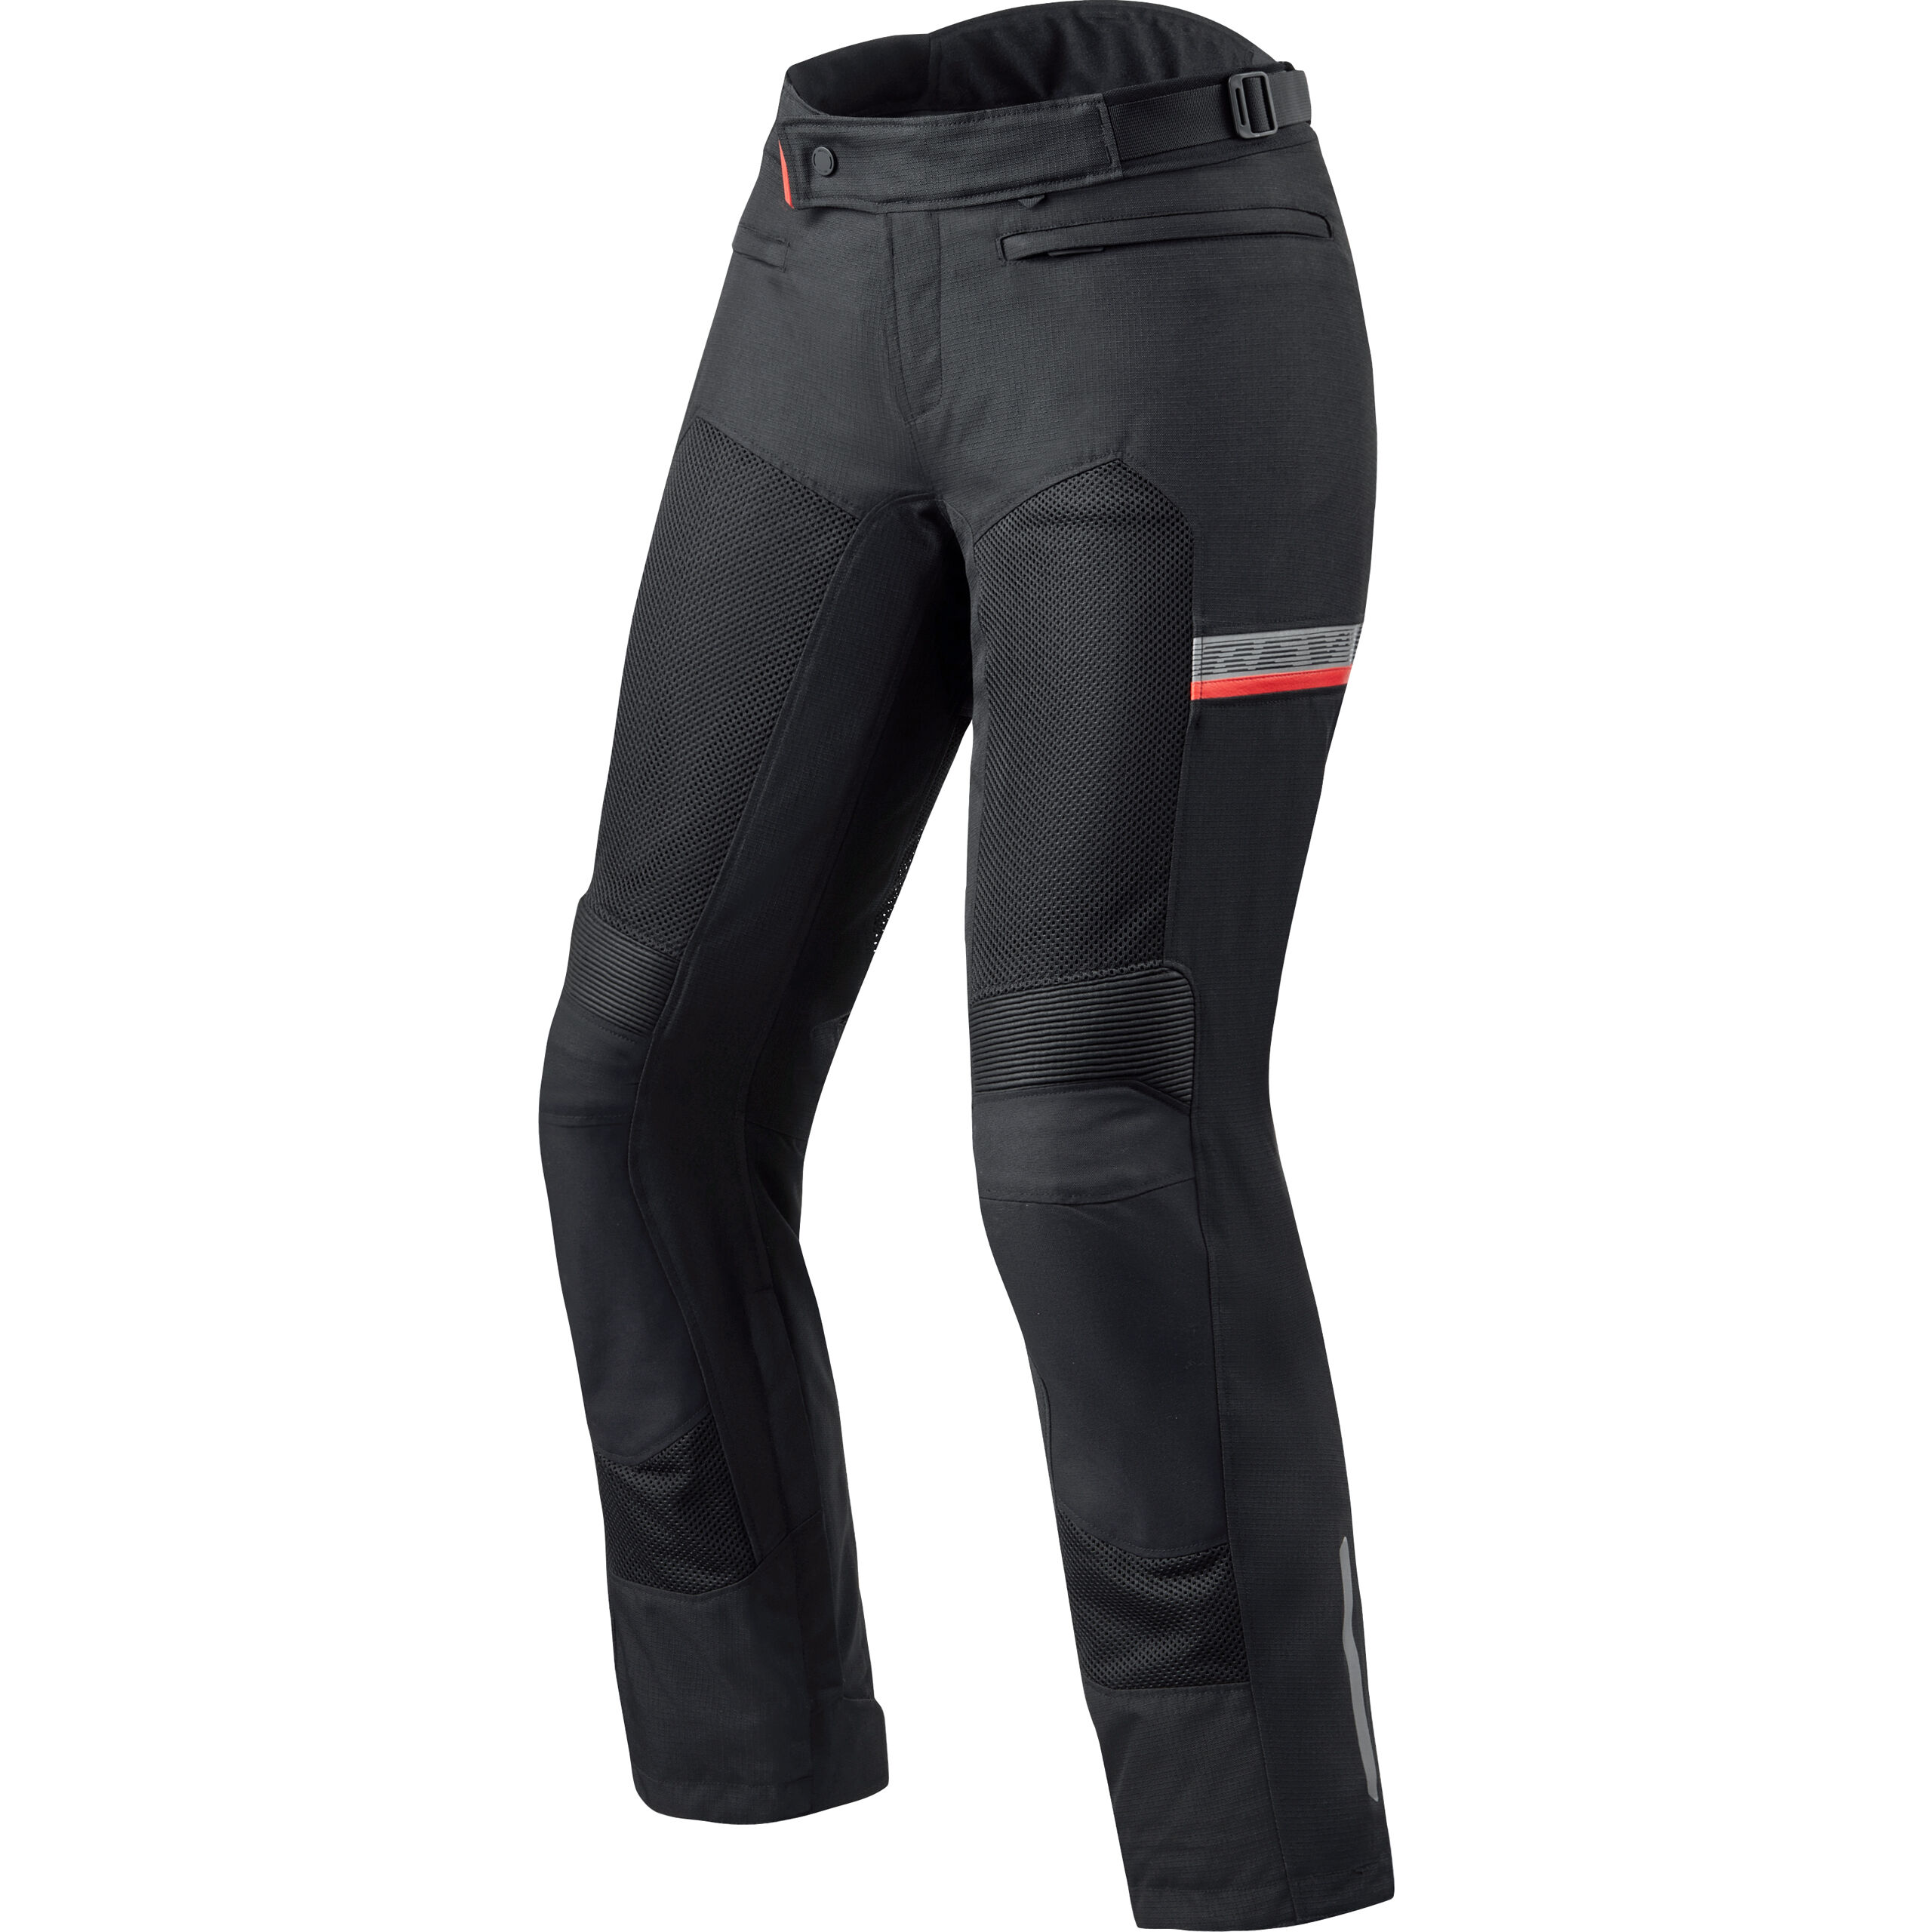 Revit Continent Trousers - Short | Motorcycle Clothing | Bike Stop UK